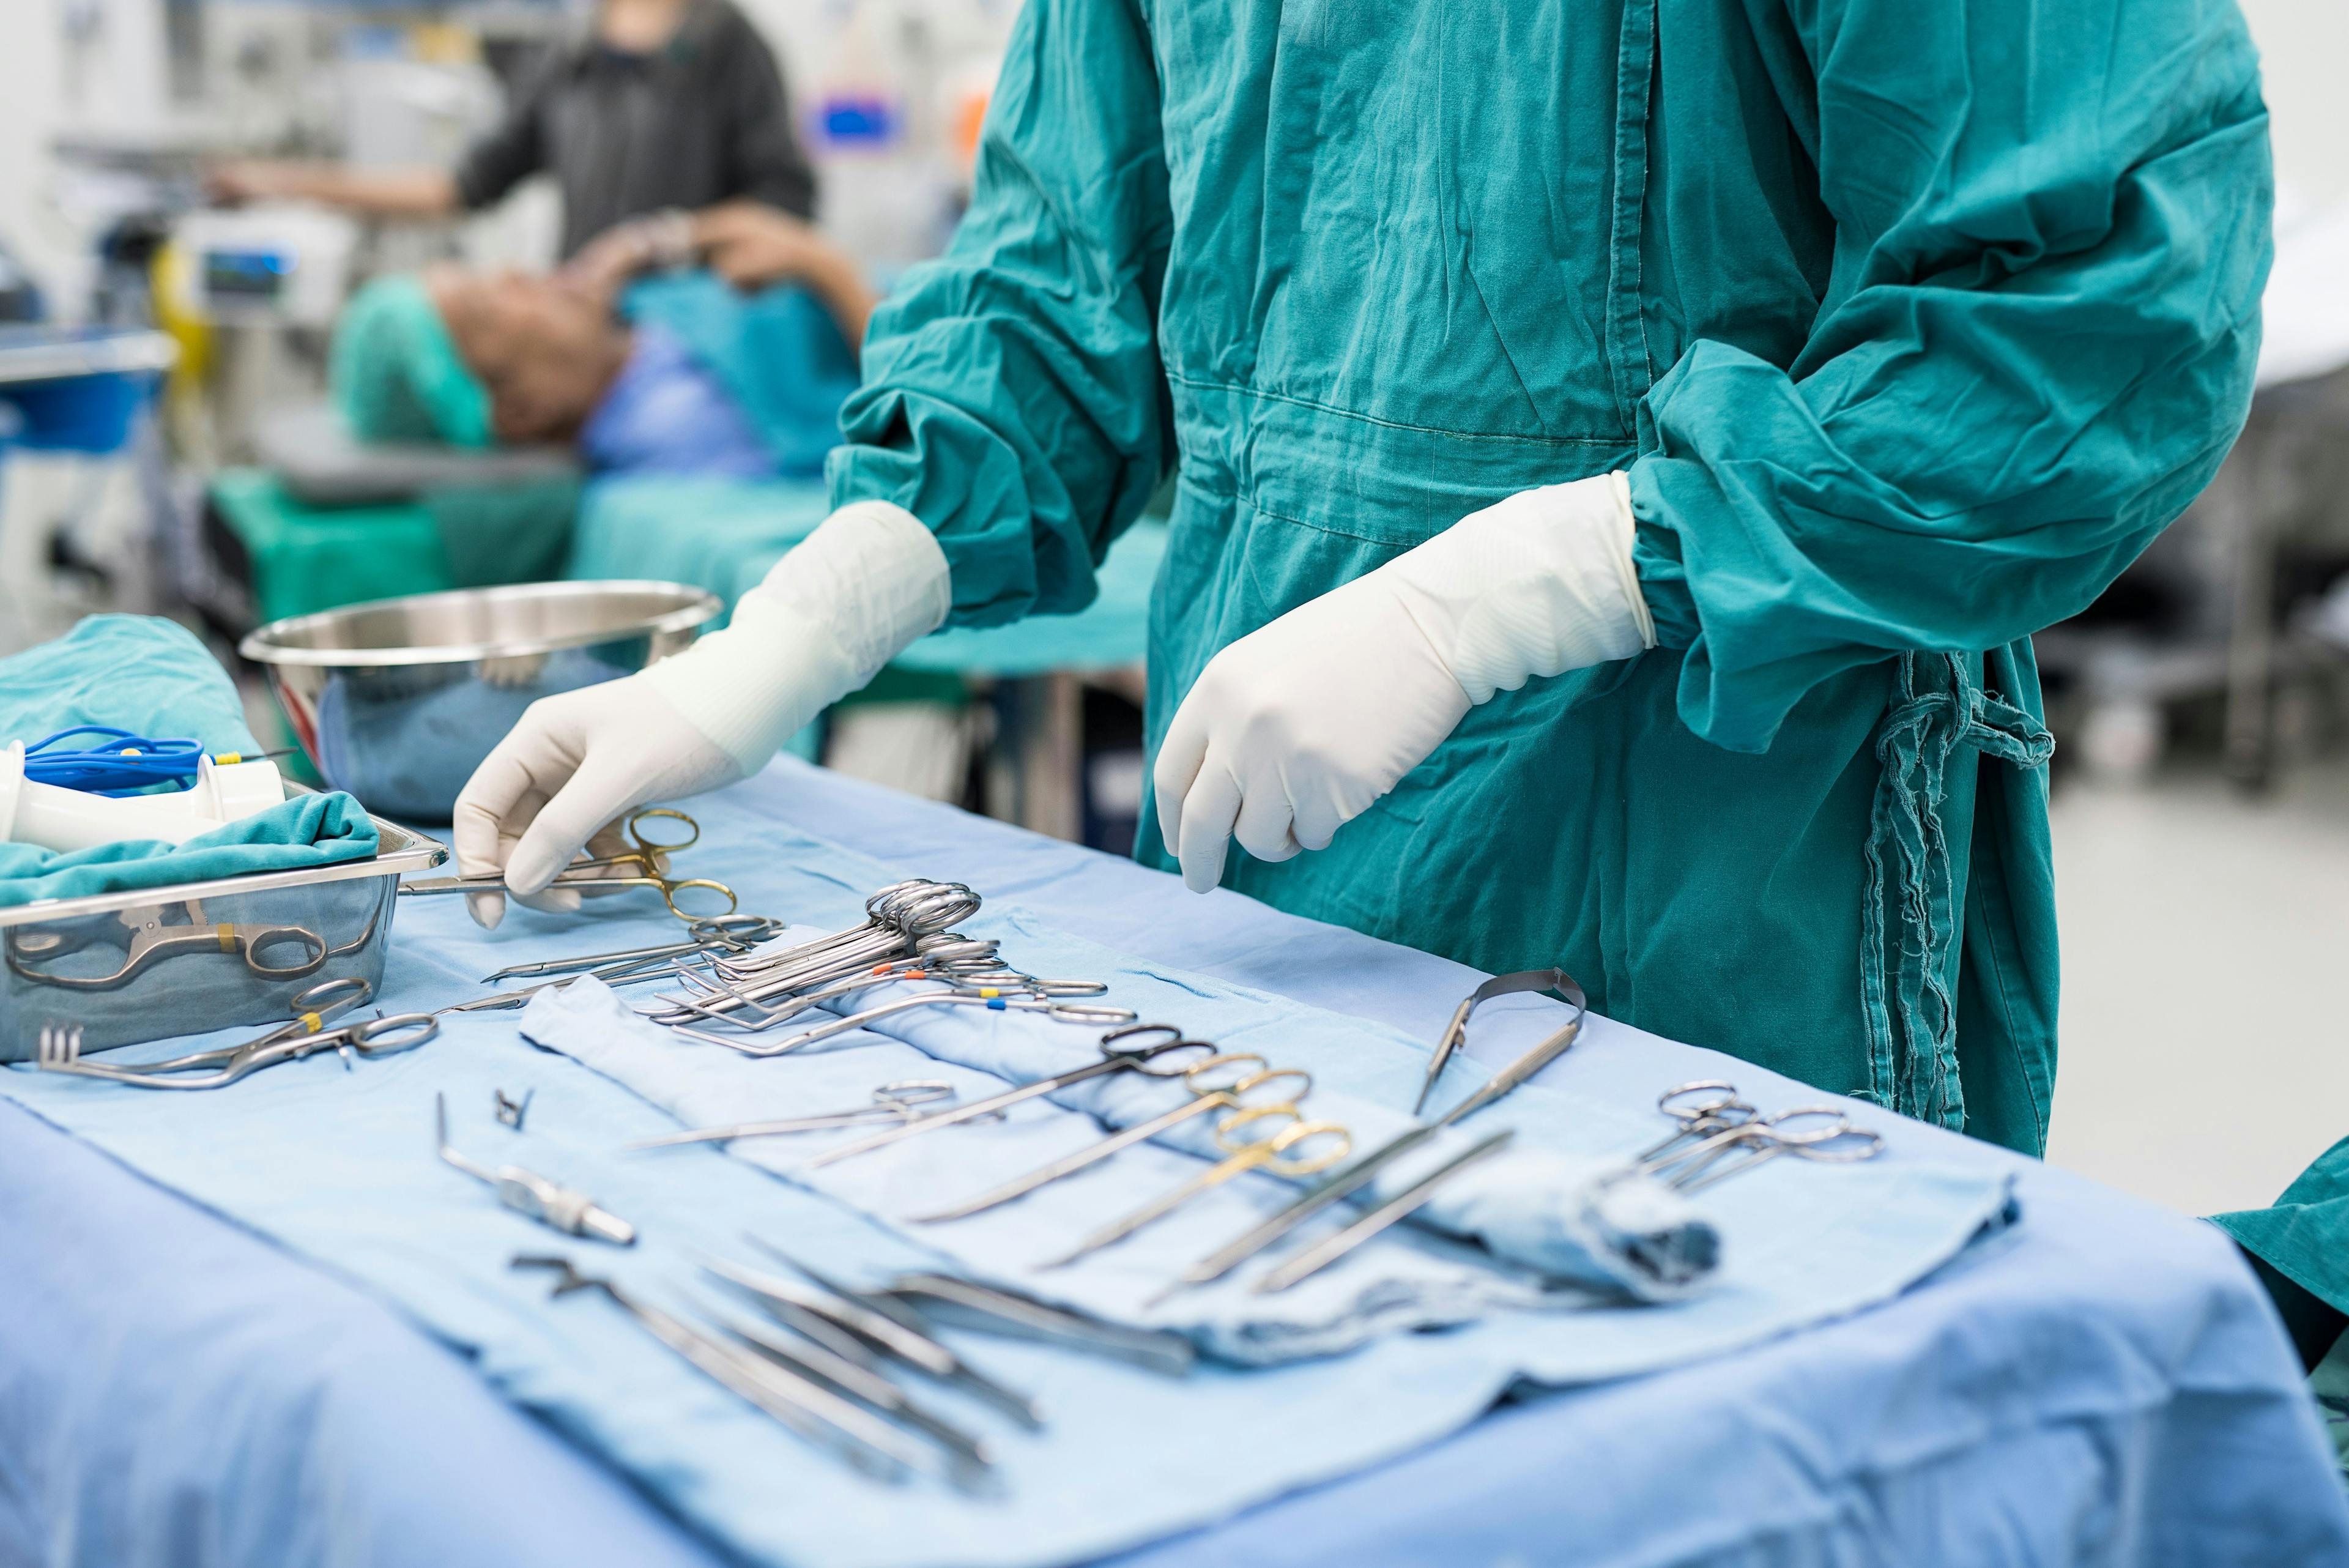 Top Tips For Optimizing Surgical Techniques to Improve Patient Outcomes 